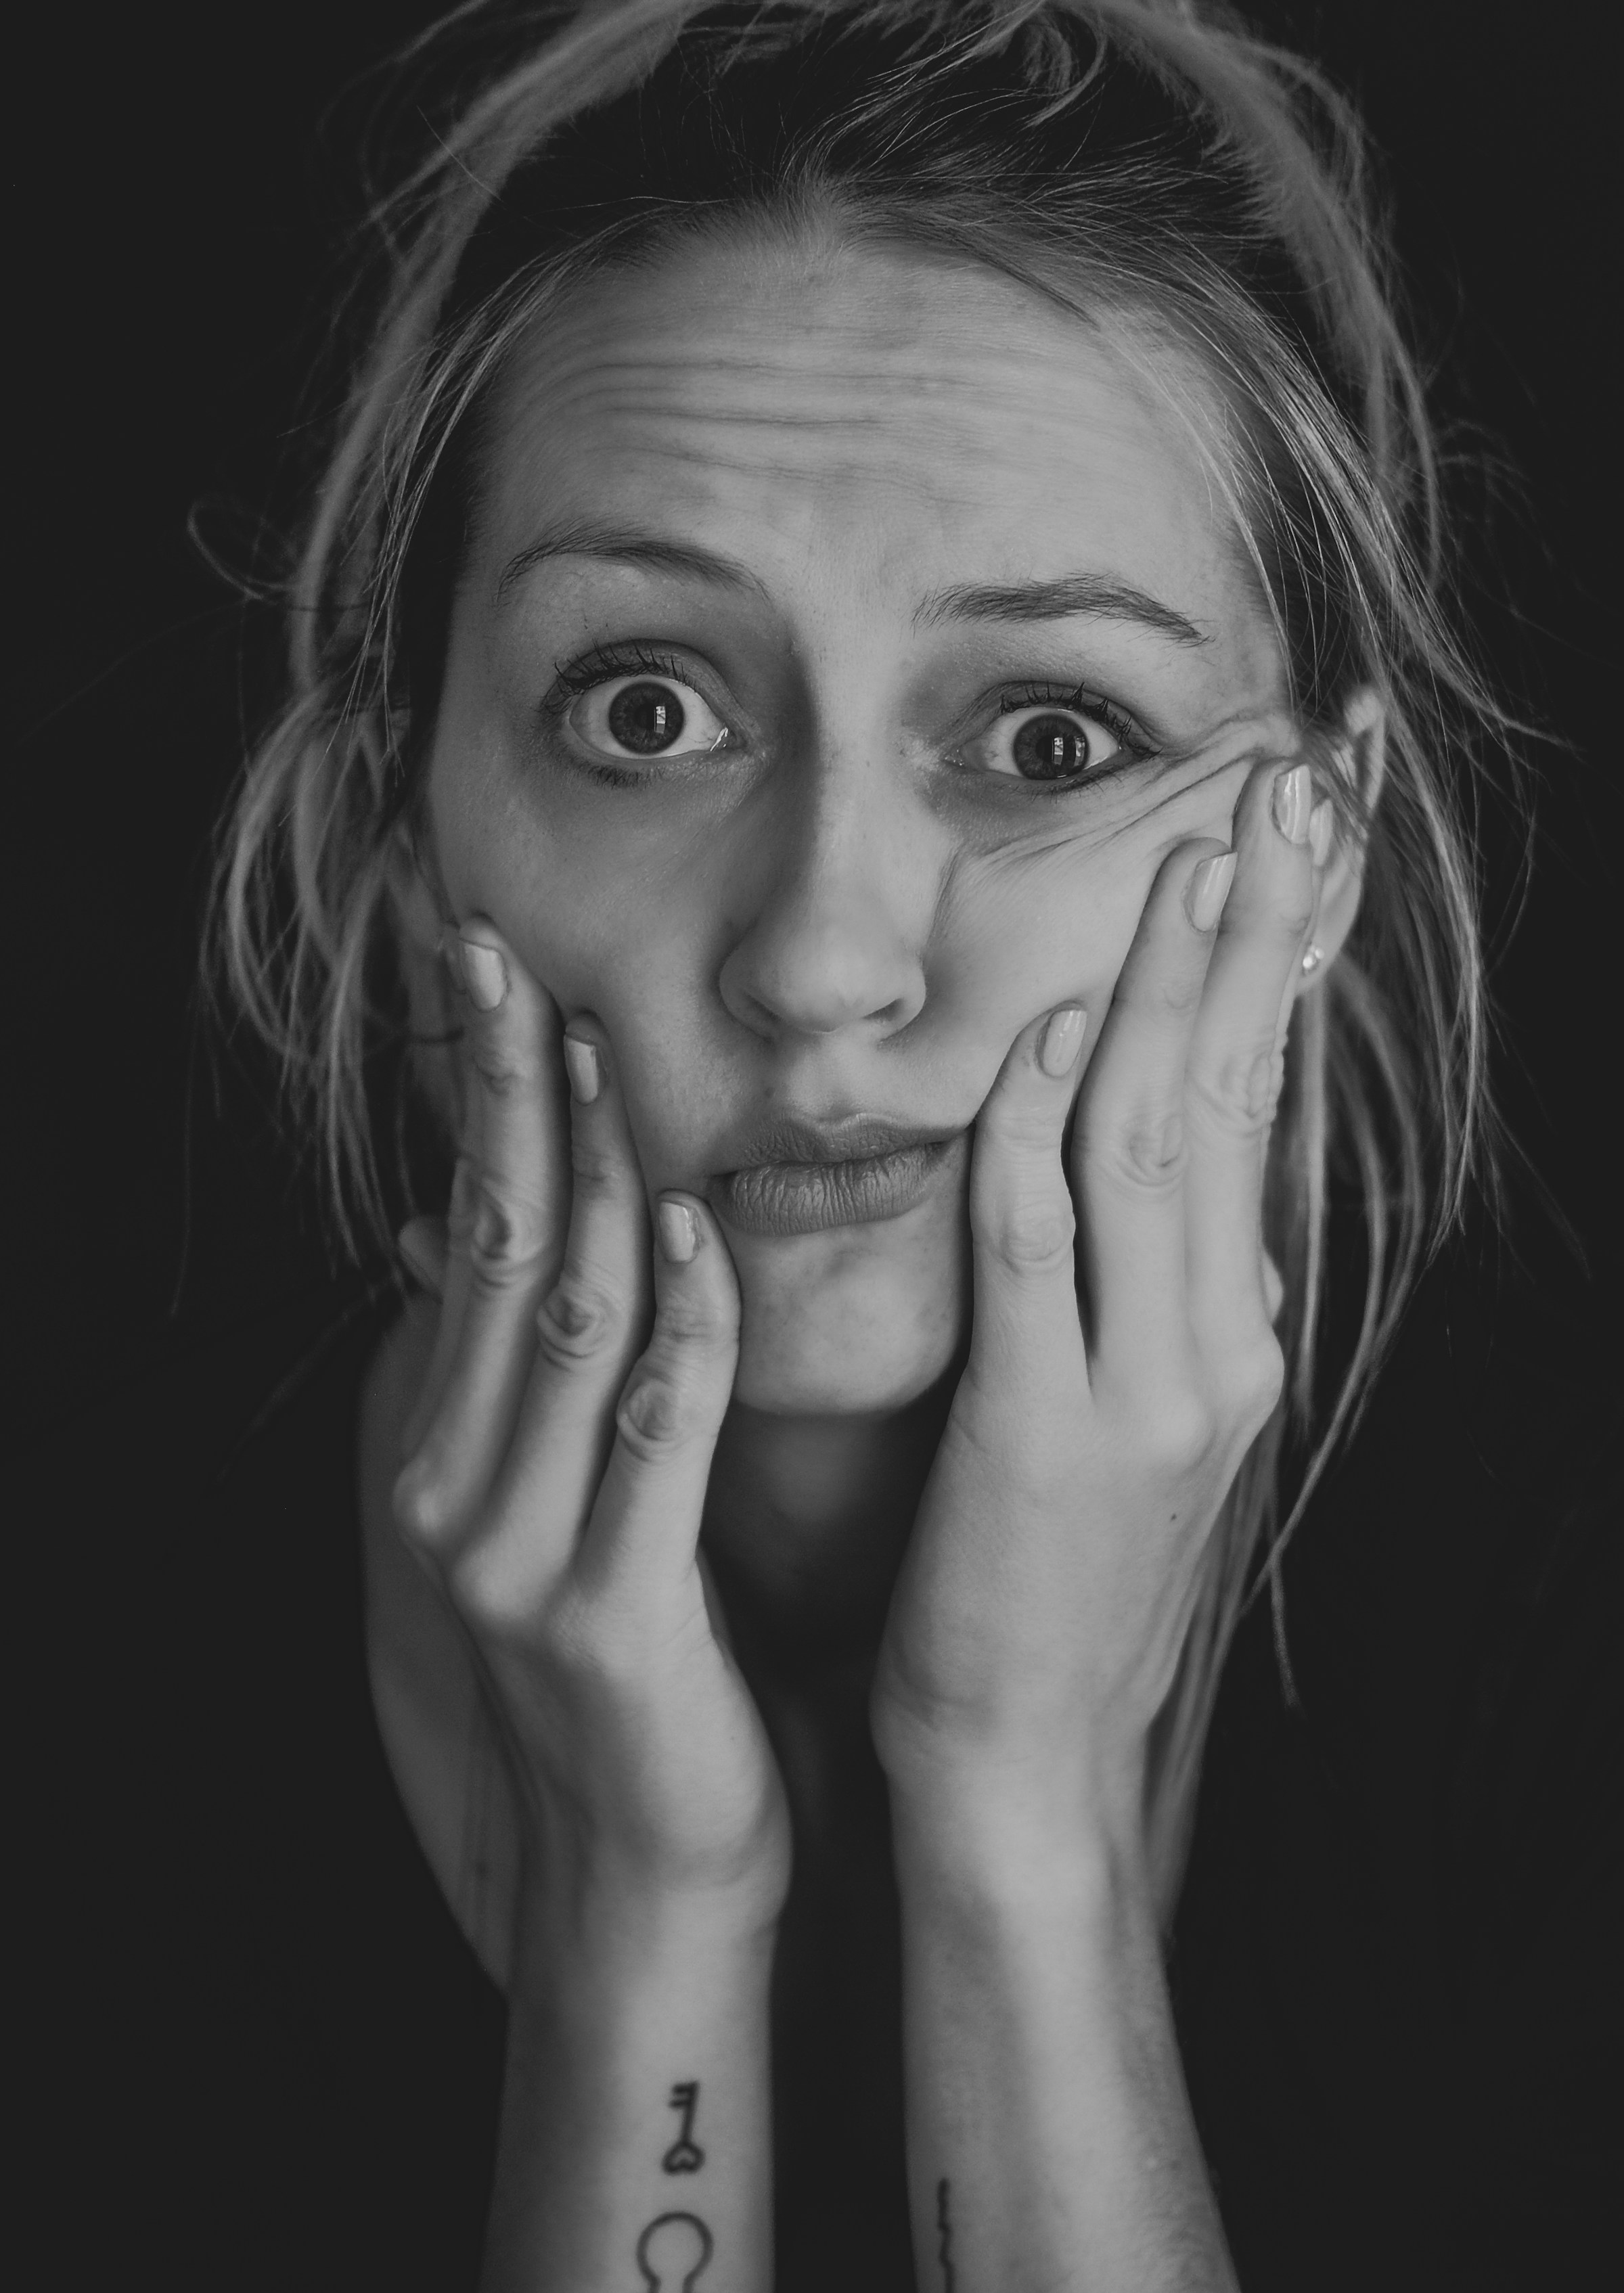 A woman holding her face | Source: Unsplash